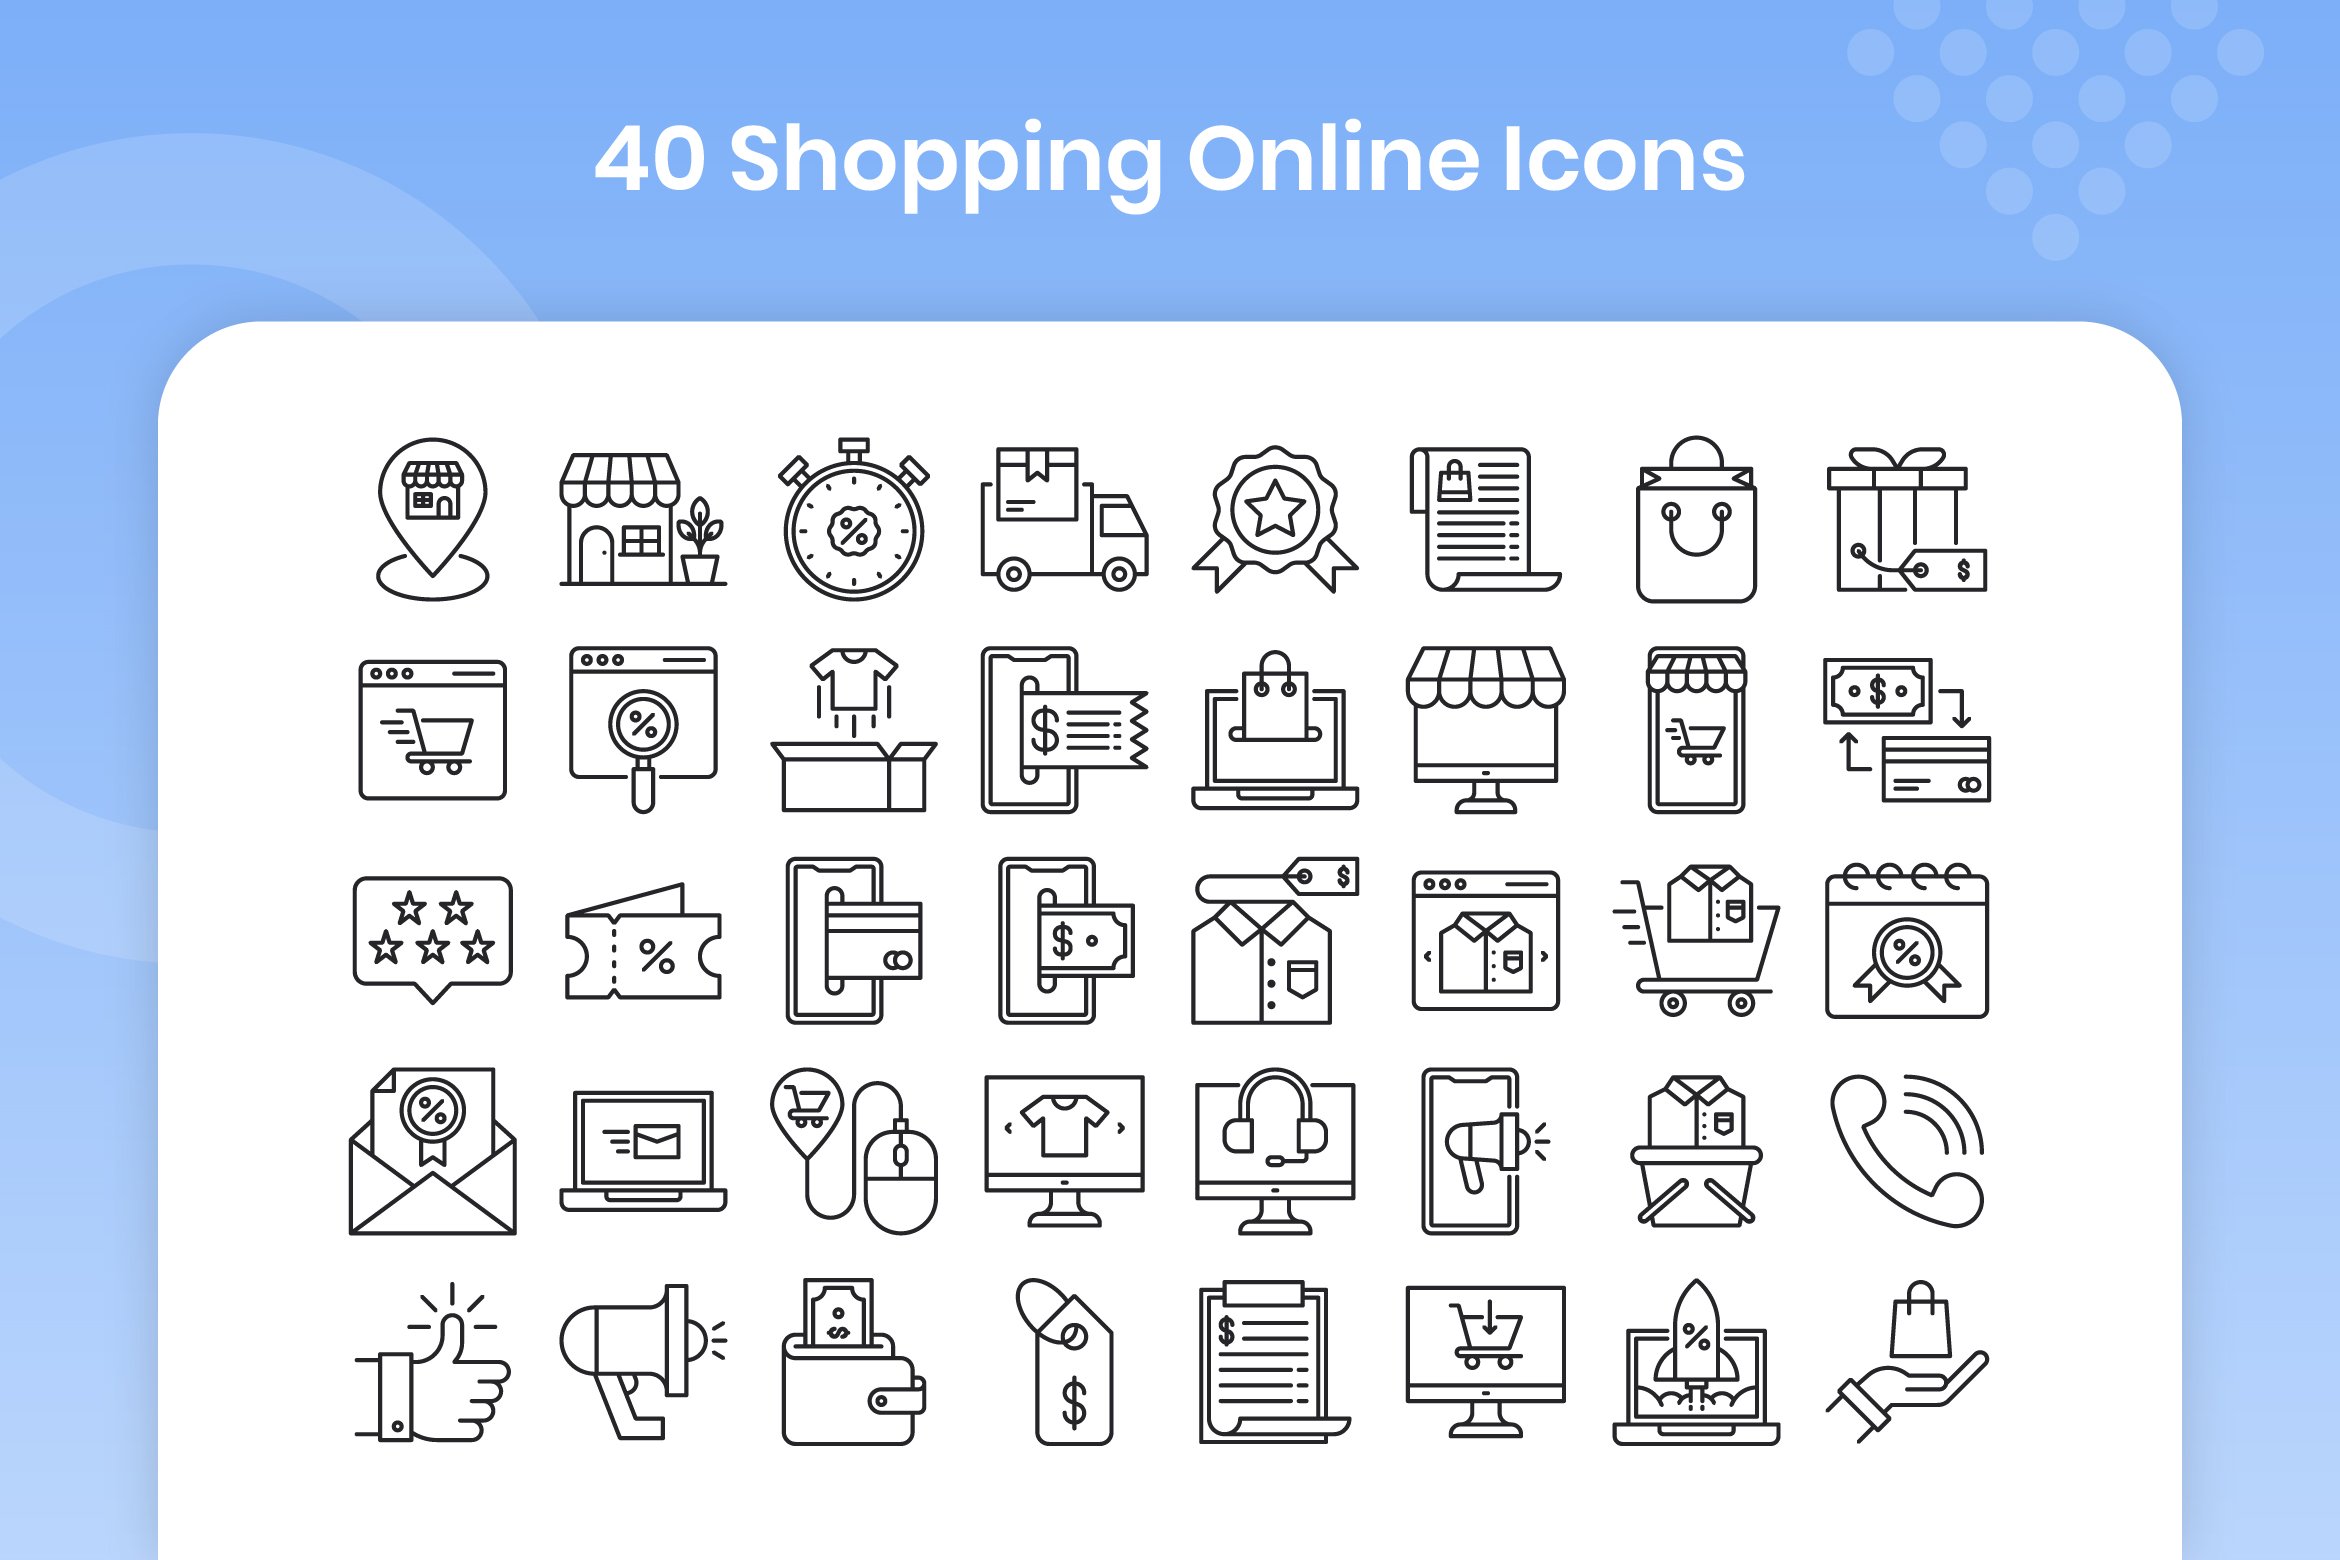 40 Shopping Online - Line preview image.